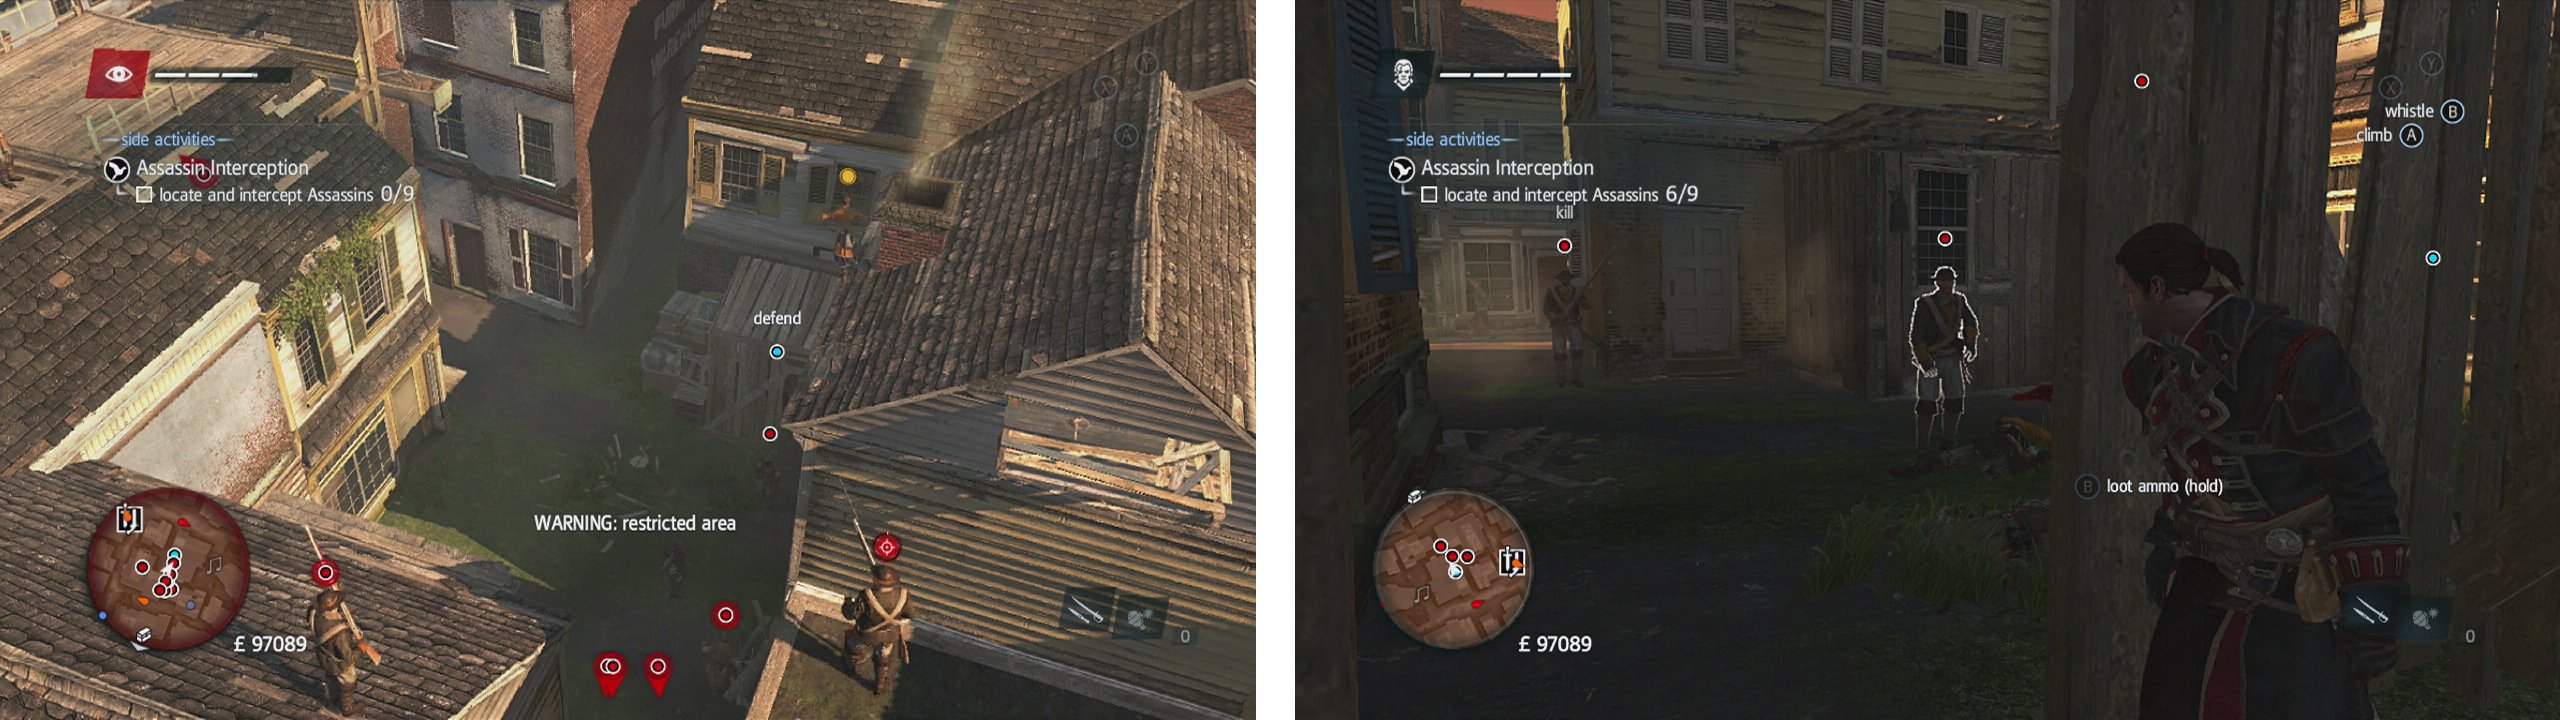 Once you reach the search area you'll be attacked (left). Once you kill all the ground based enemies, hide inside (right) to draw the snipers down.